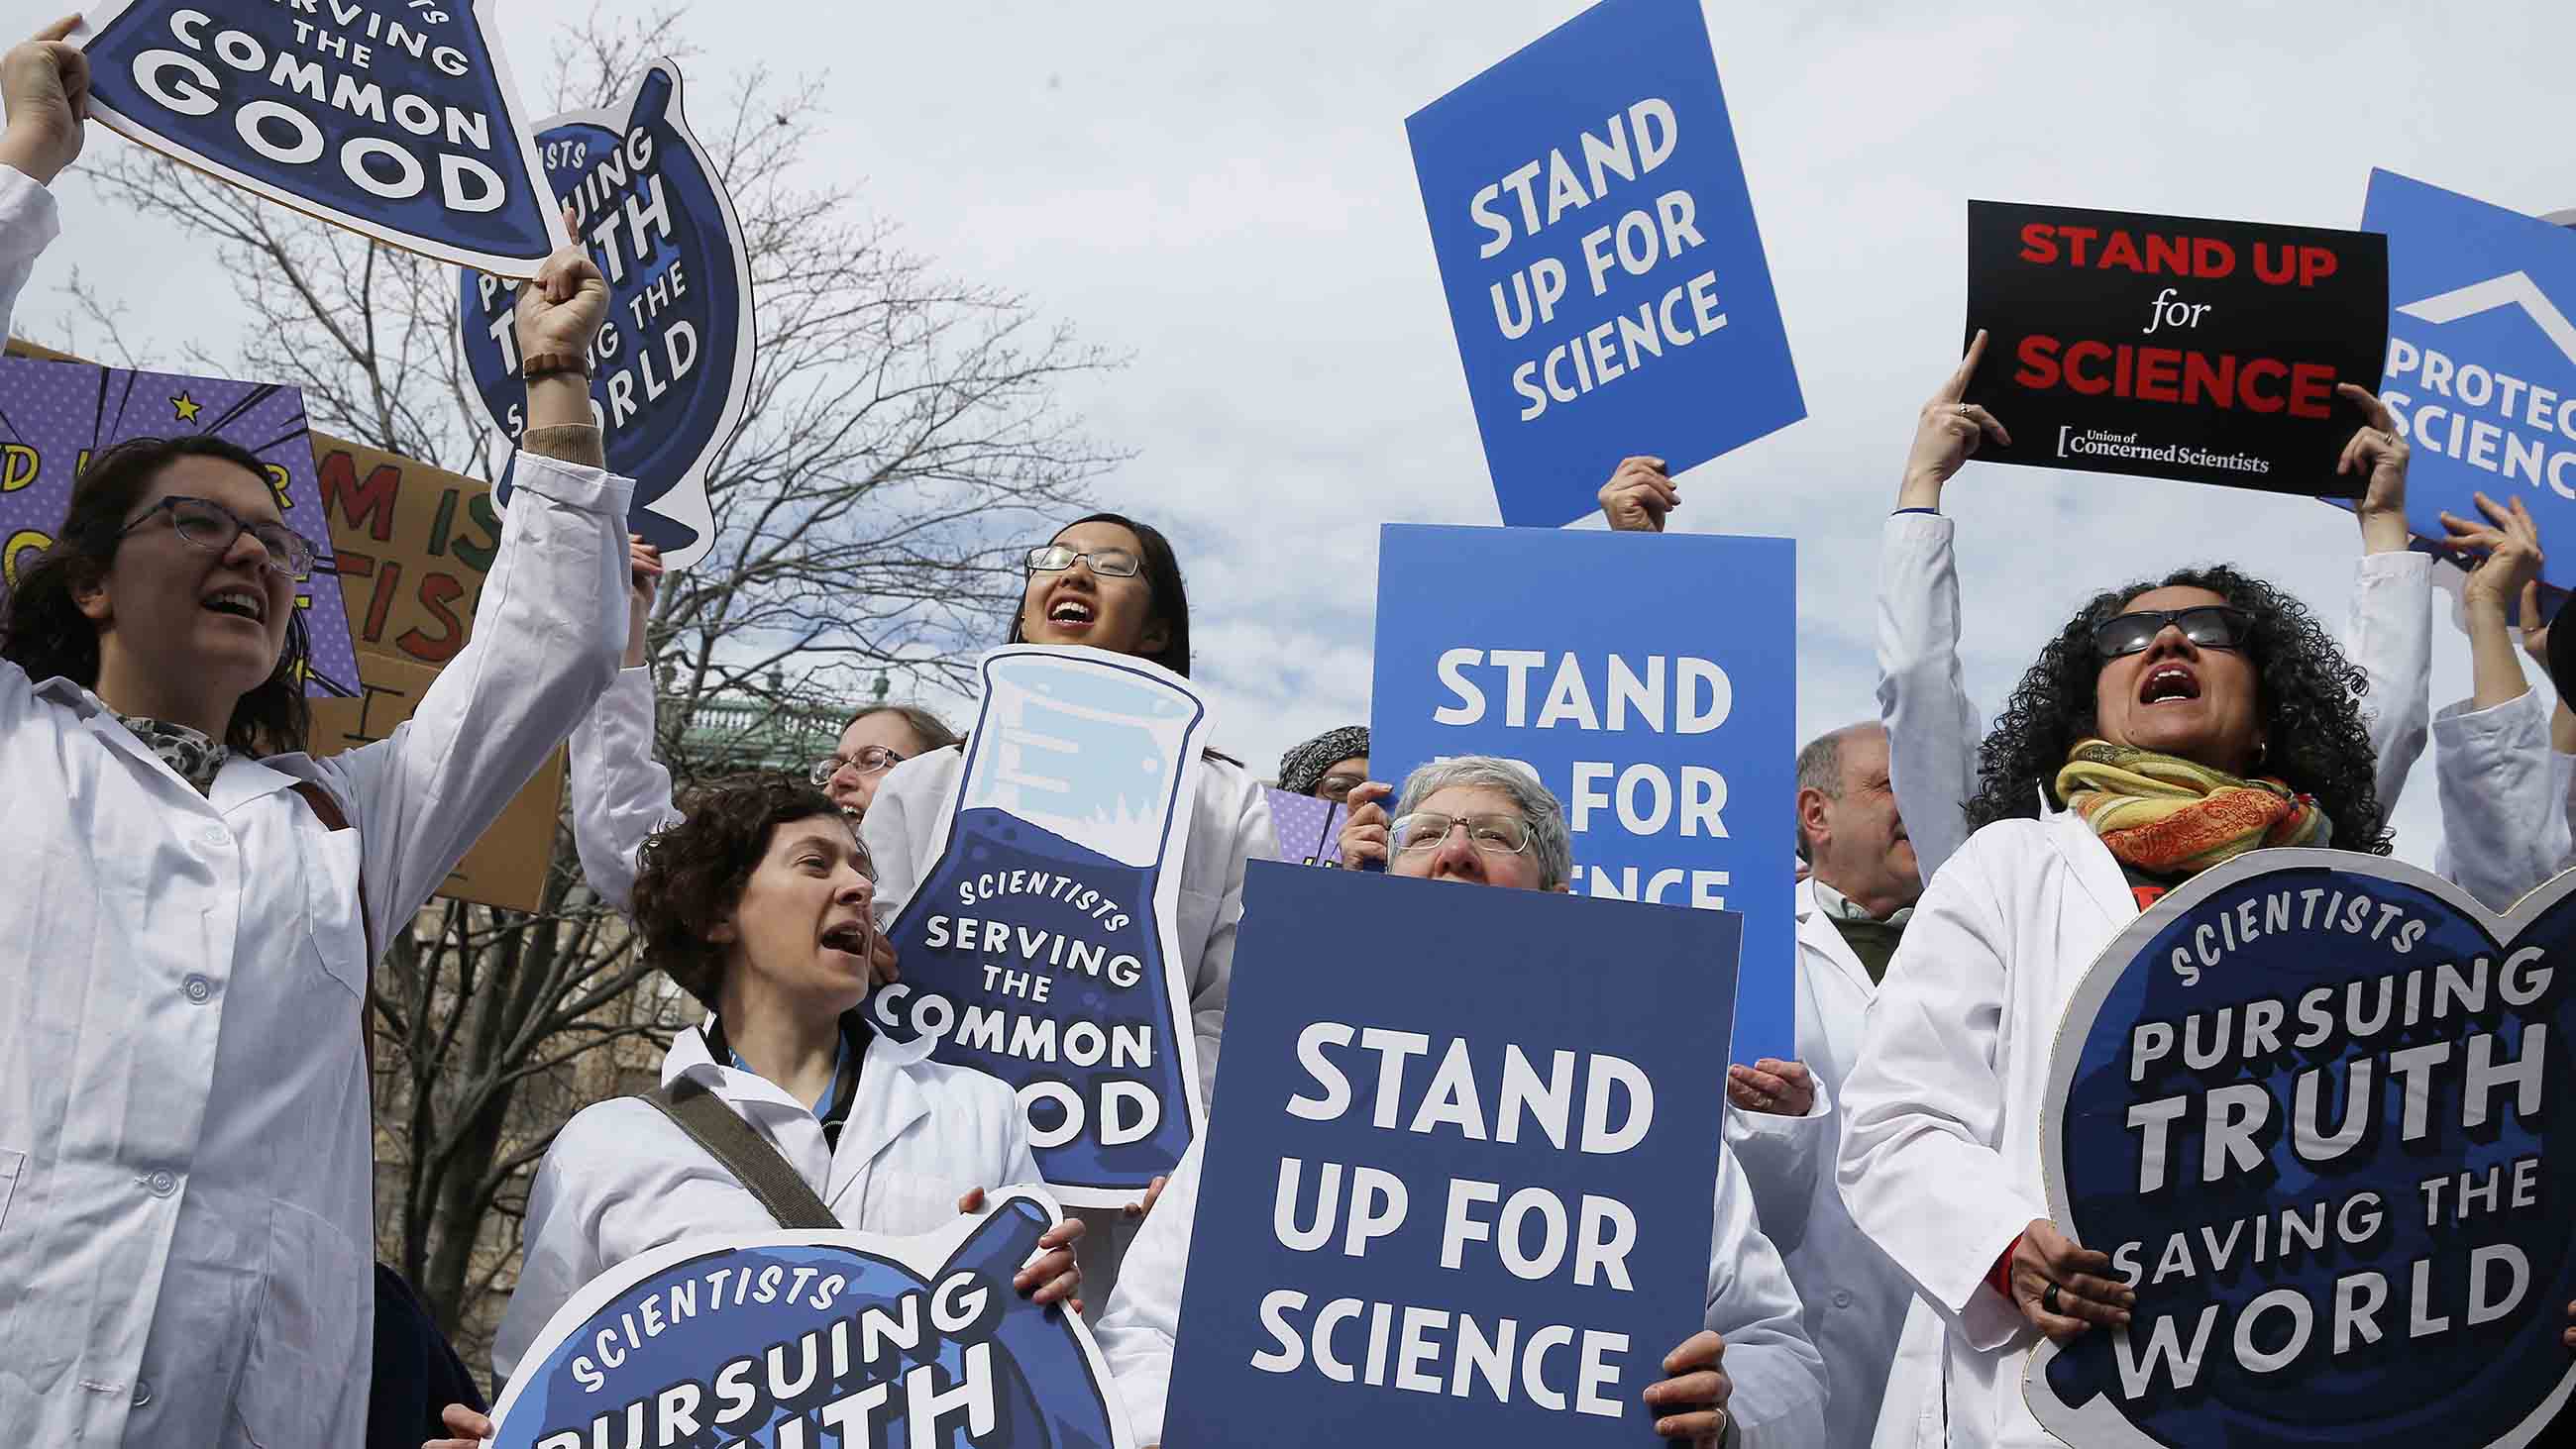 Scientists, science advocates and community members gathered in Boston's Copley Square in February for a Rally to Stand up for Science.